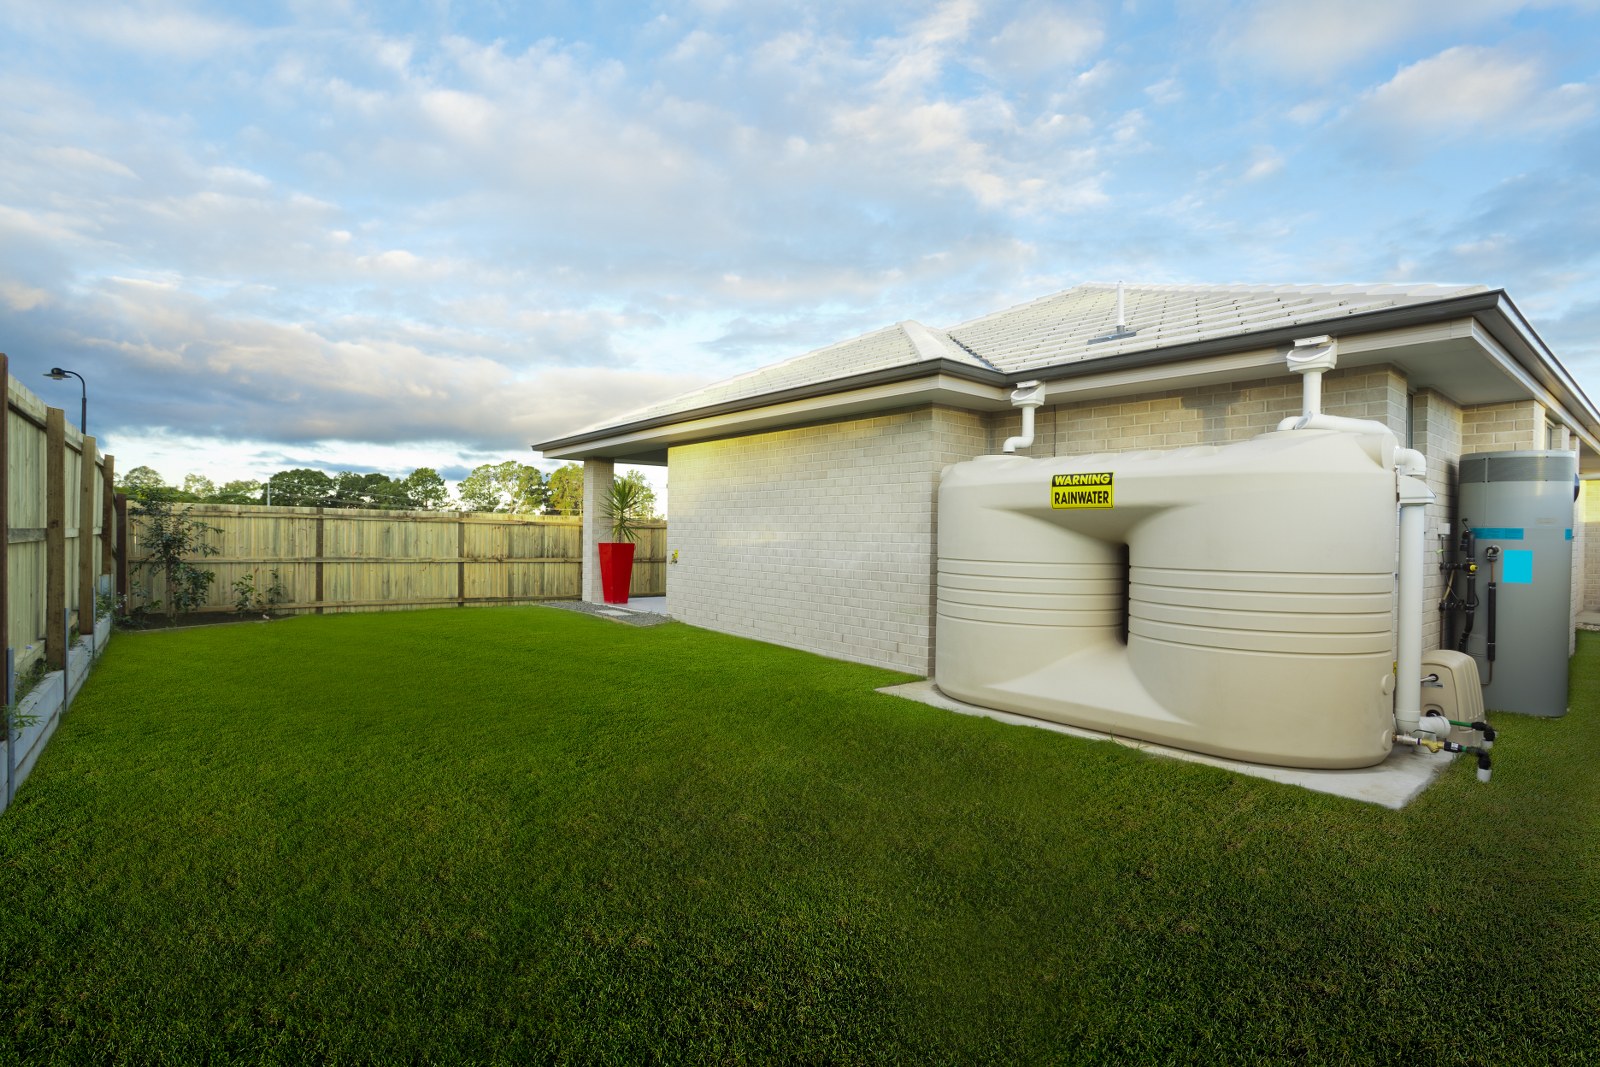 How To Incorporate Water Tanks Into Your Landscape Design The 